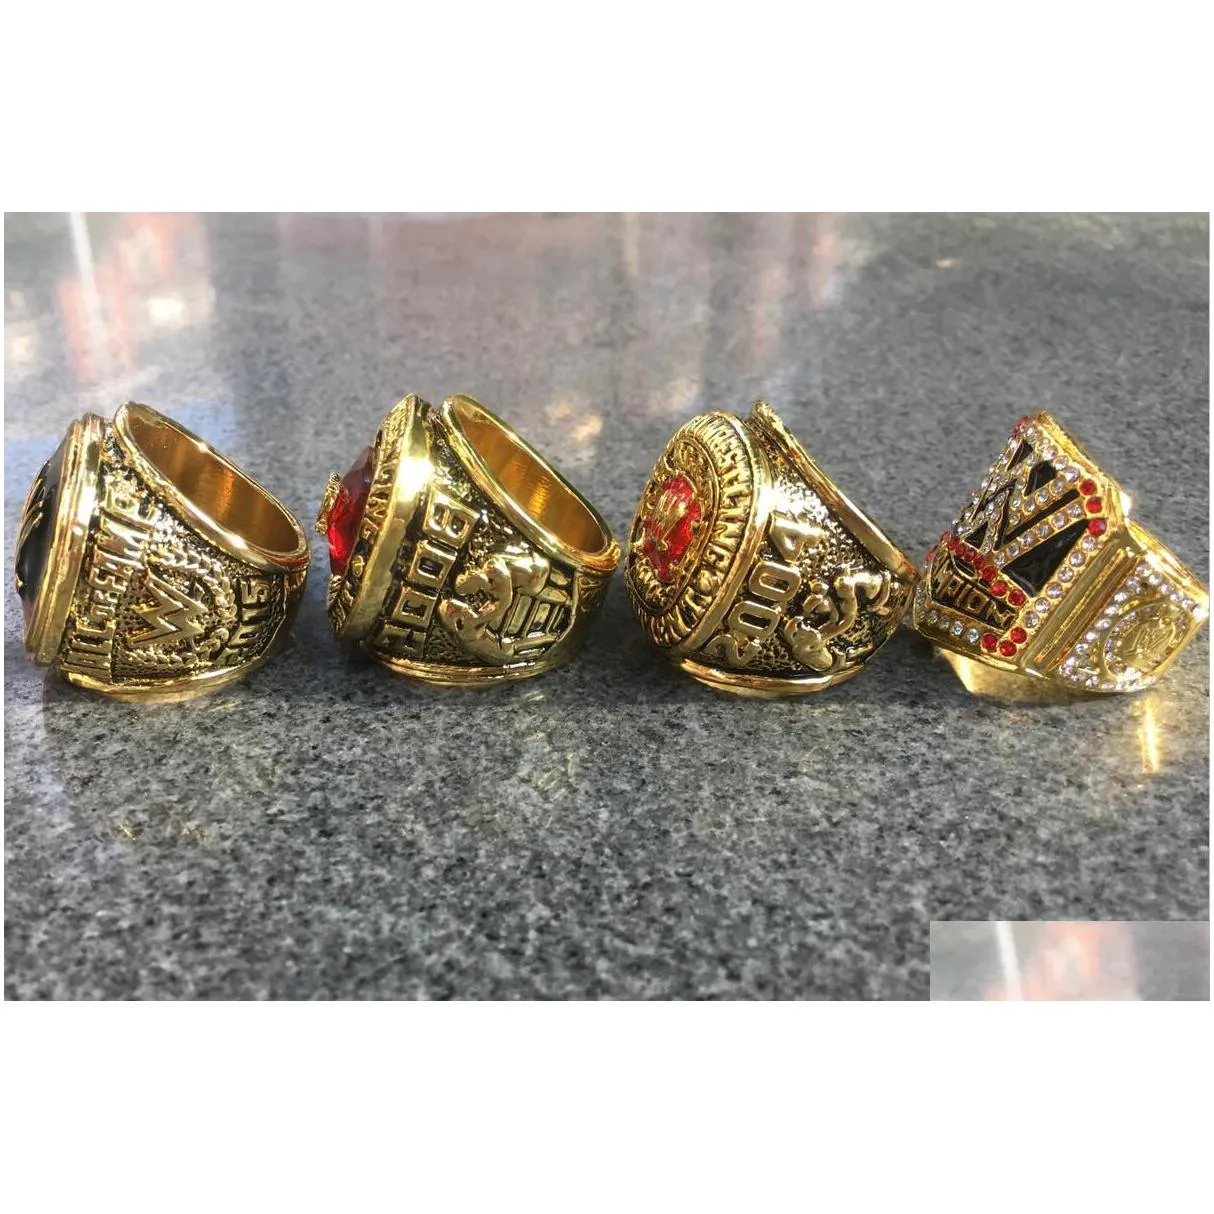 Cluster Rings 4Pcs 2004 2008 Wrestling Federation Hall Of Fame Championship Ring Souvenir Men Fan Gift Wholesale Drop Delivery Jewelry Dh5Qm